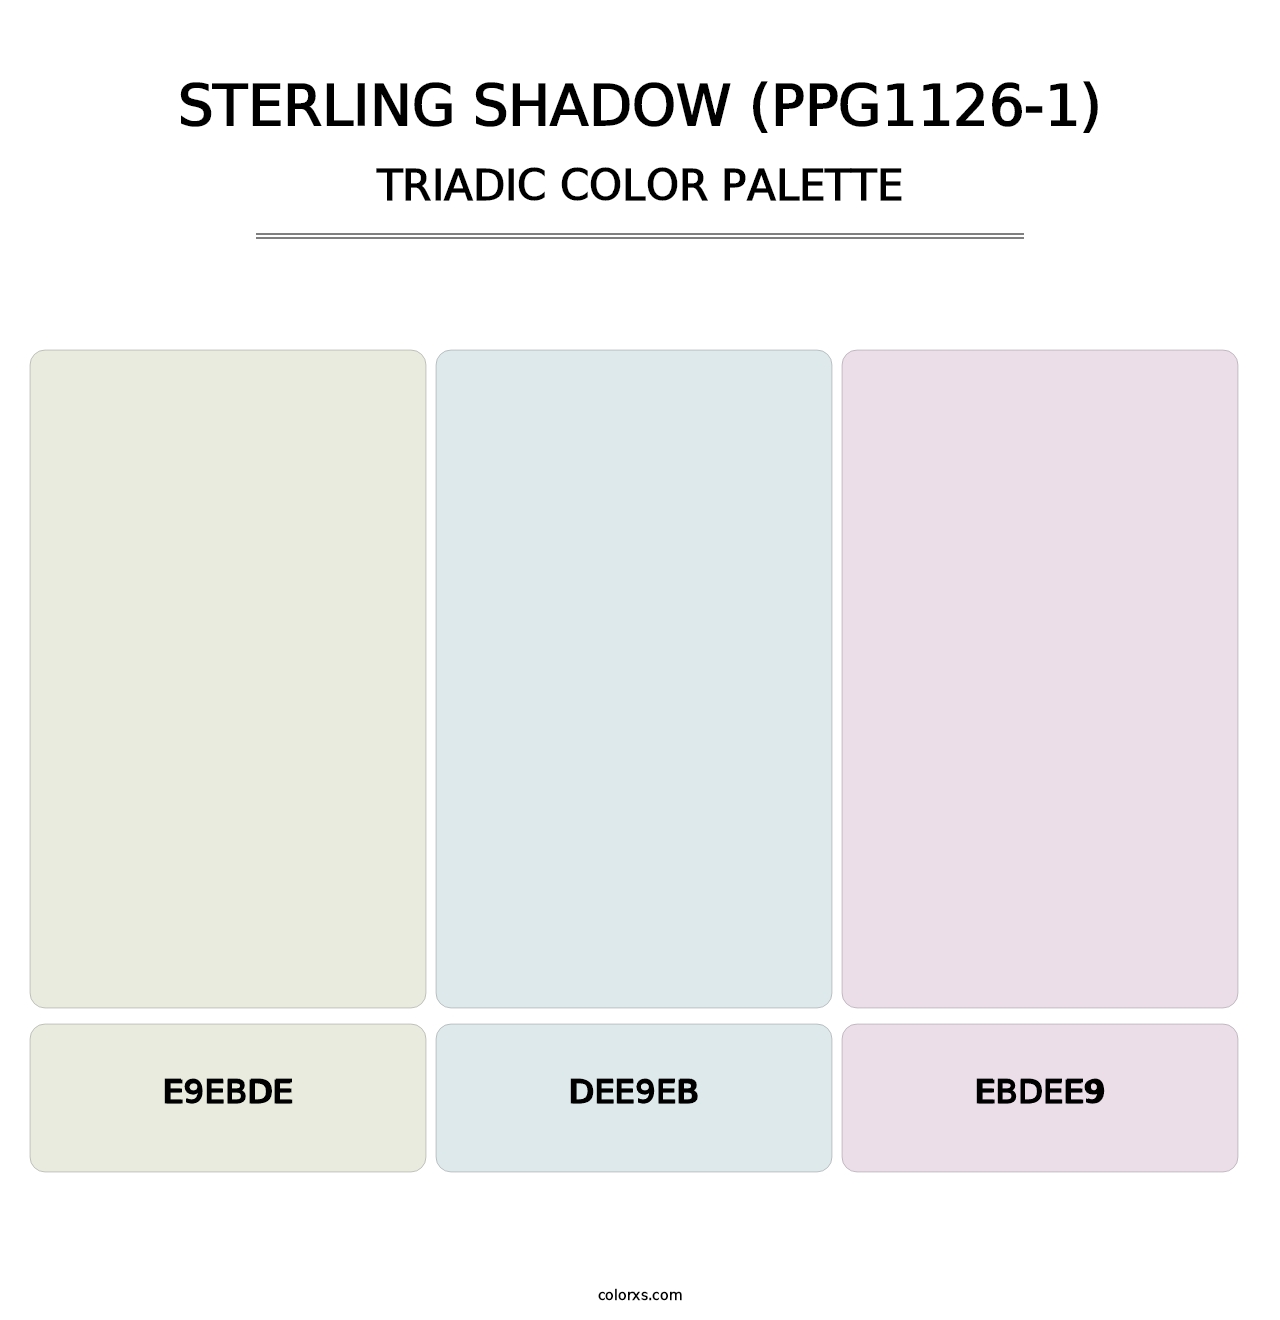 Sterling Shadow (PPG1126-1) - Triadic Color Palette